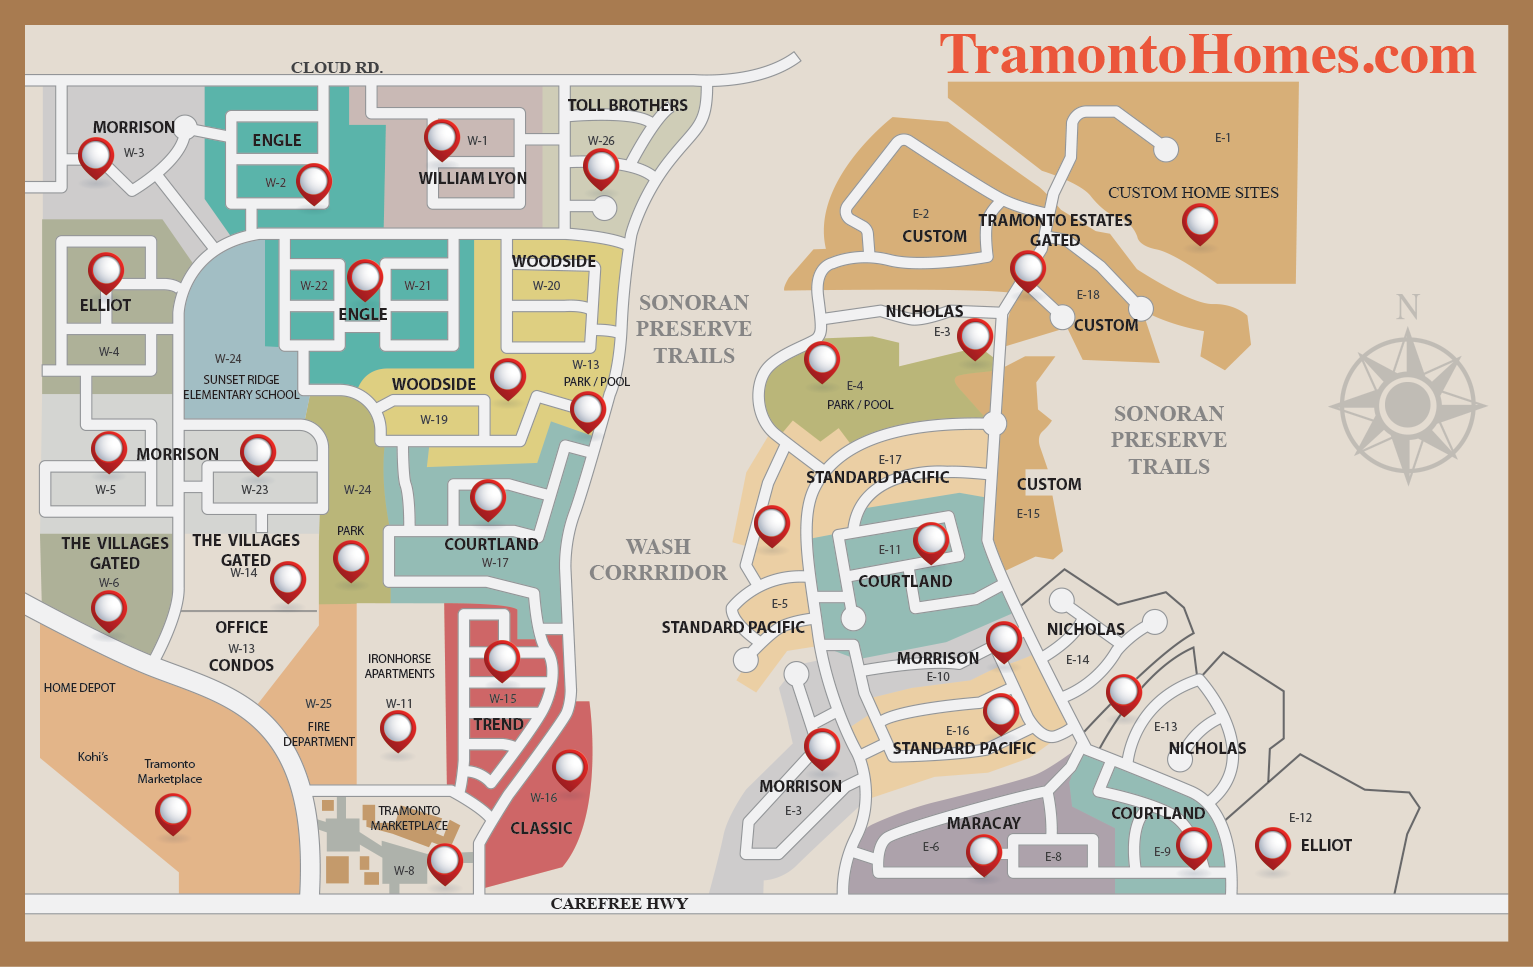 Click here to see a Map of the community of Tramonto in Phoenix AZ